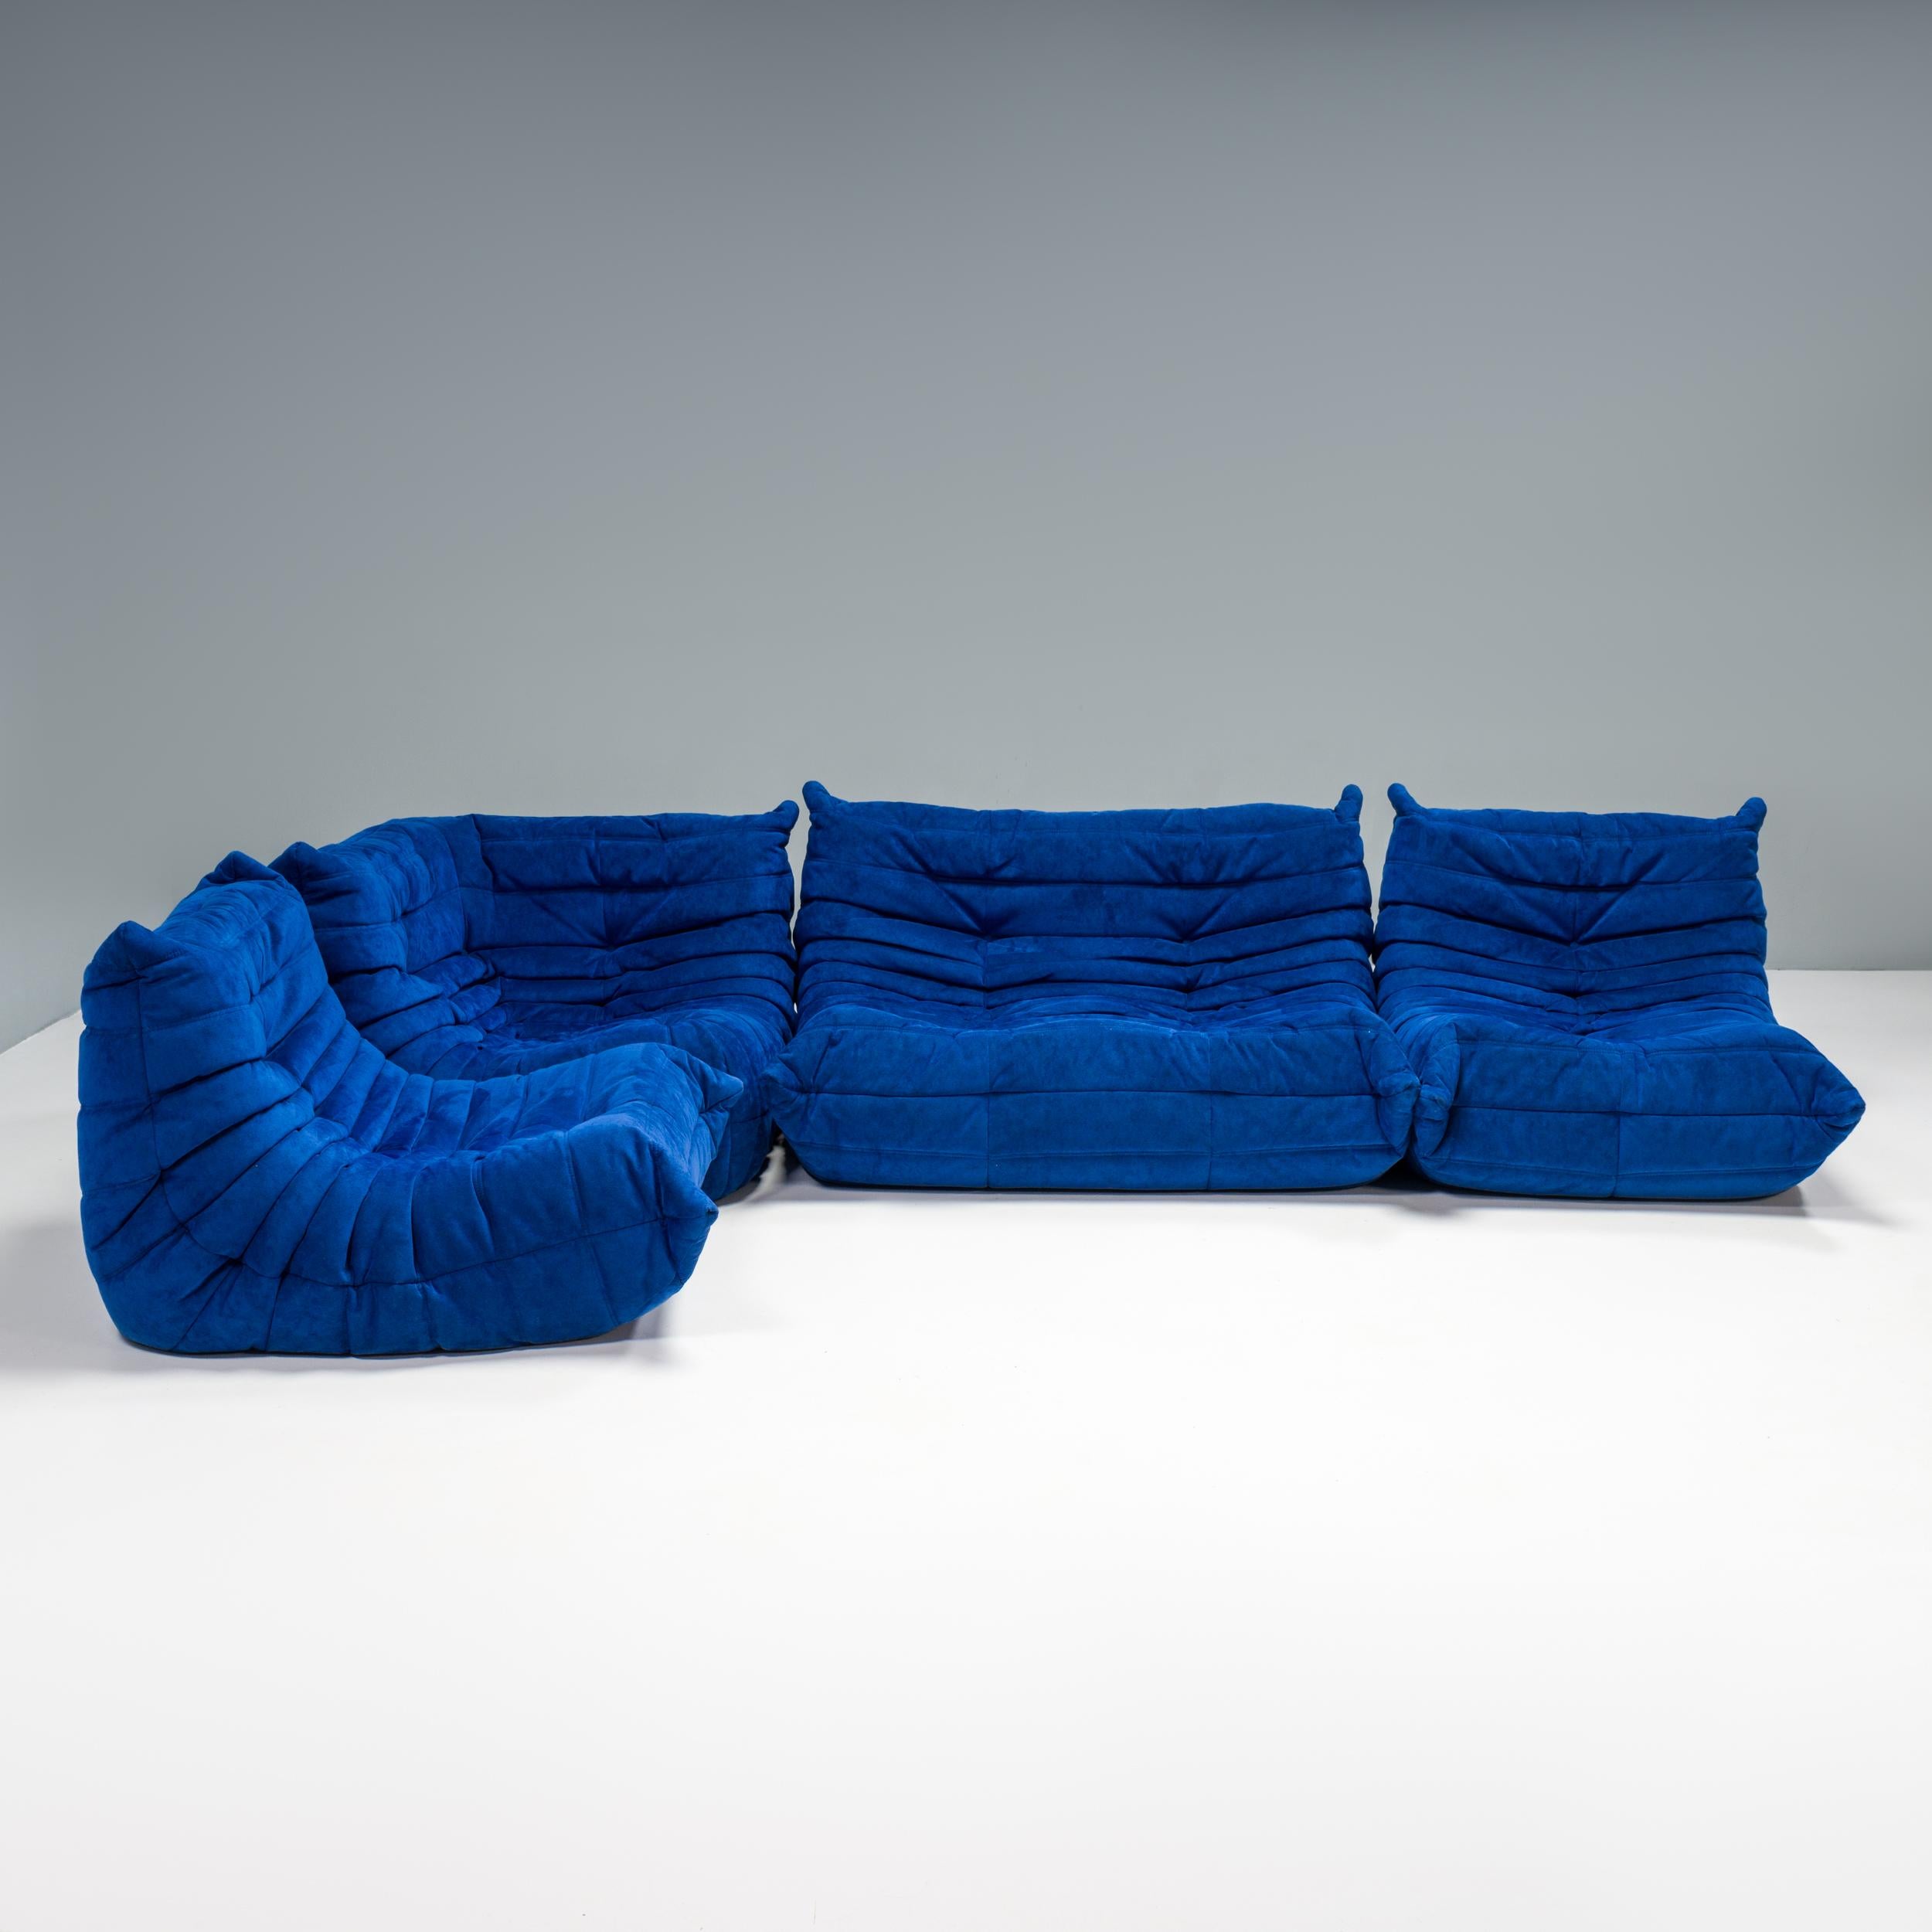 The iconic Togo orange sofa set, originally designed by Michel Ducaroy for Ligne Roset in 1973, has become a design mid century classic.

The sofas are upholstered in a the original alcantara blue fabric. Made completely from foam, with three